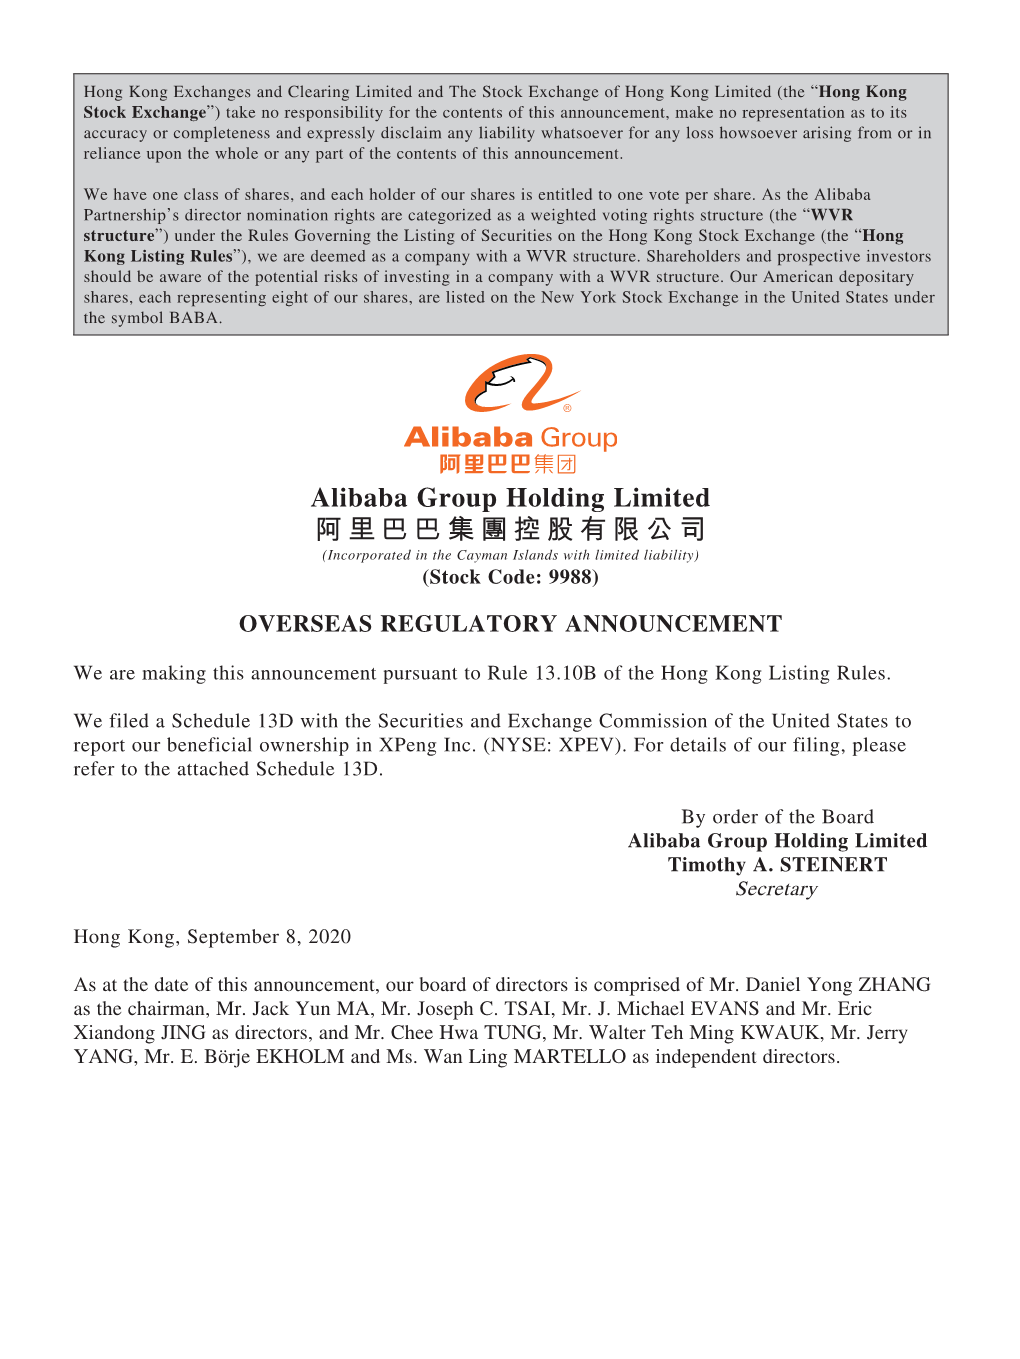 Alibaba Group Holding Limited 阿里巴巴集團控股有限公司 (Incorporated in the Cayman Islands with Limited Liability) (Stock Code: 9988)